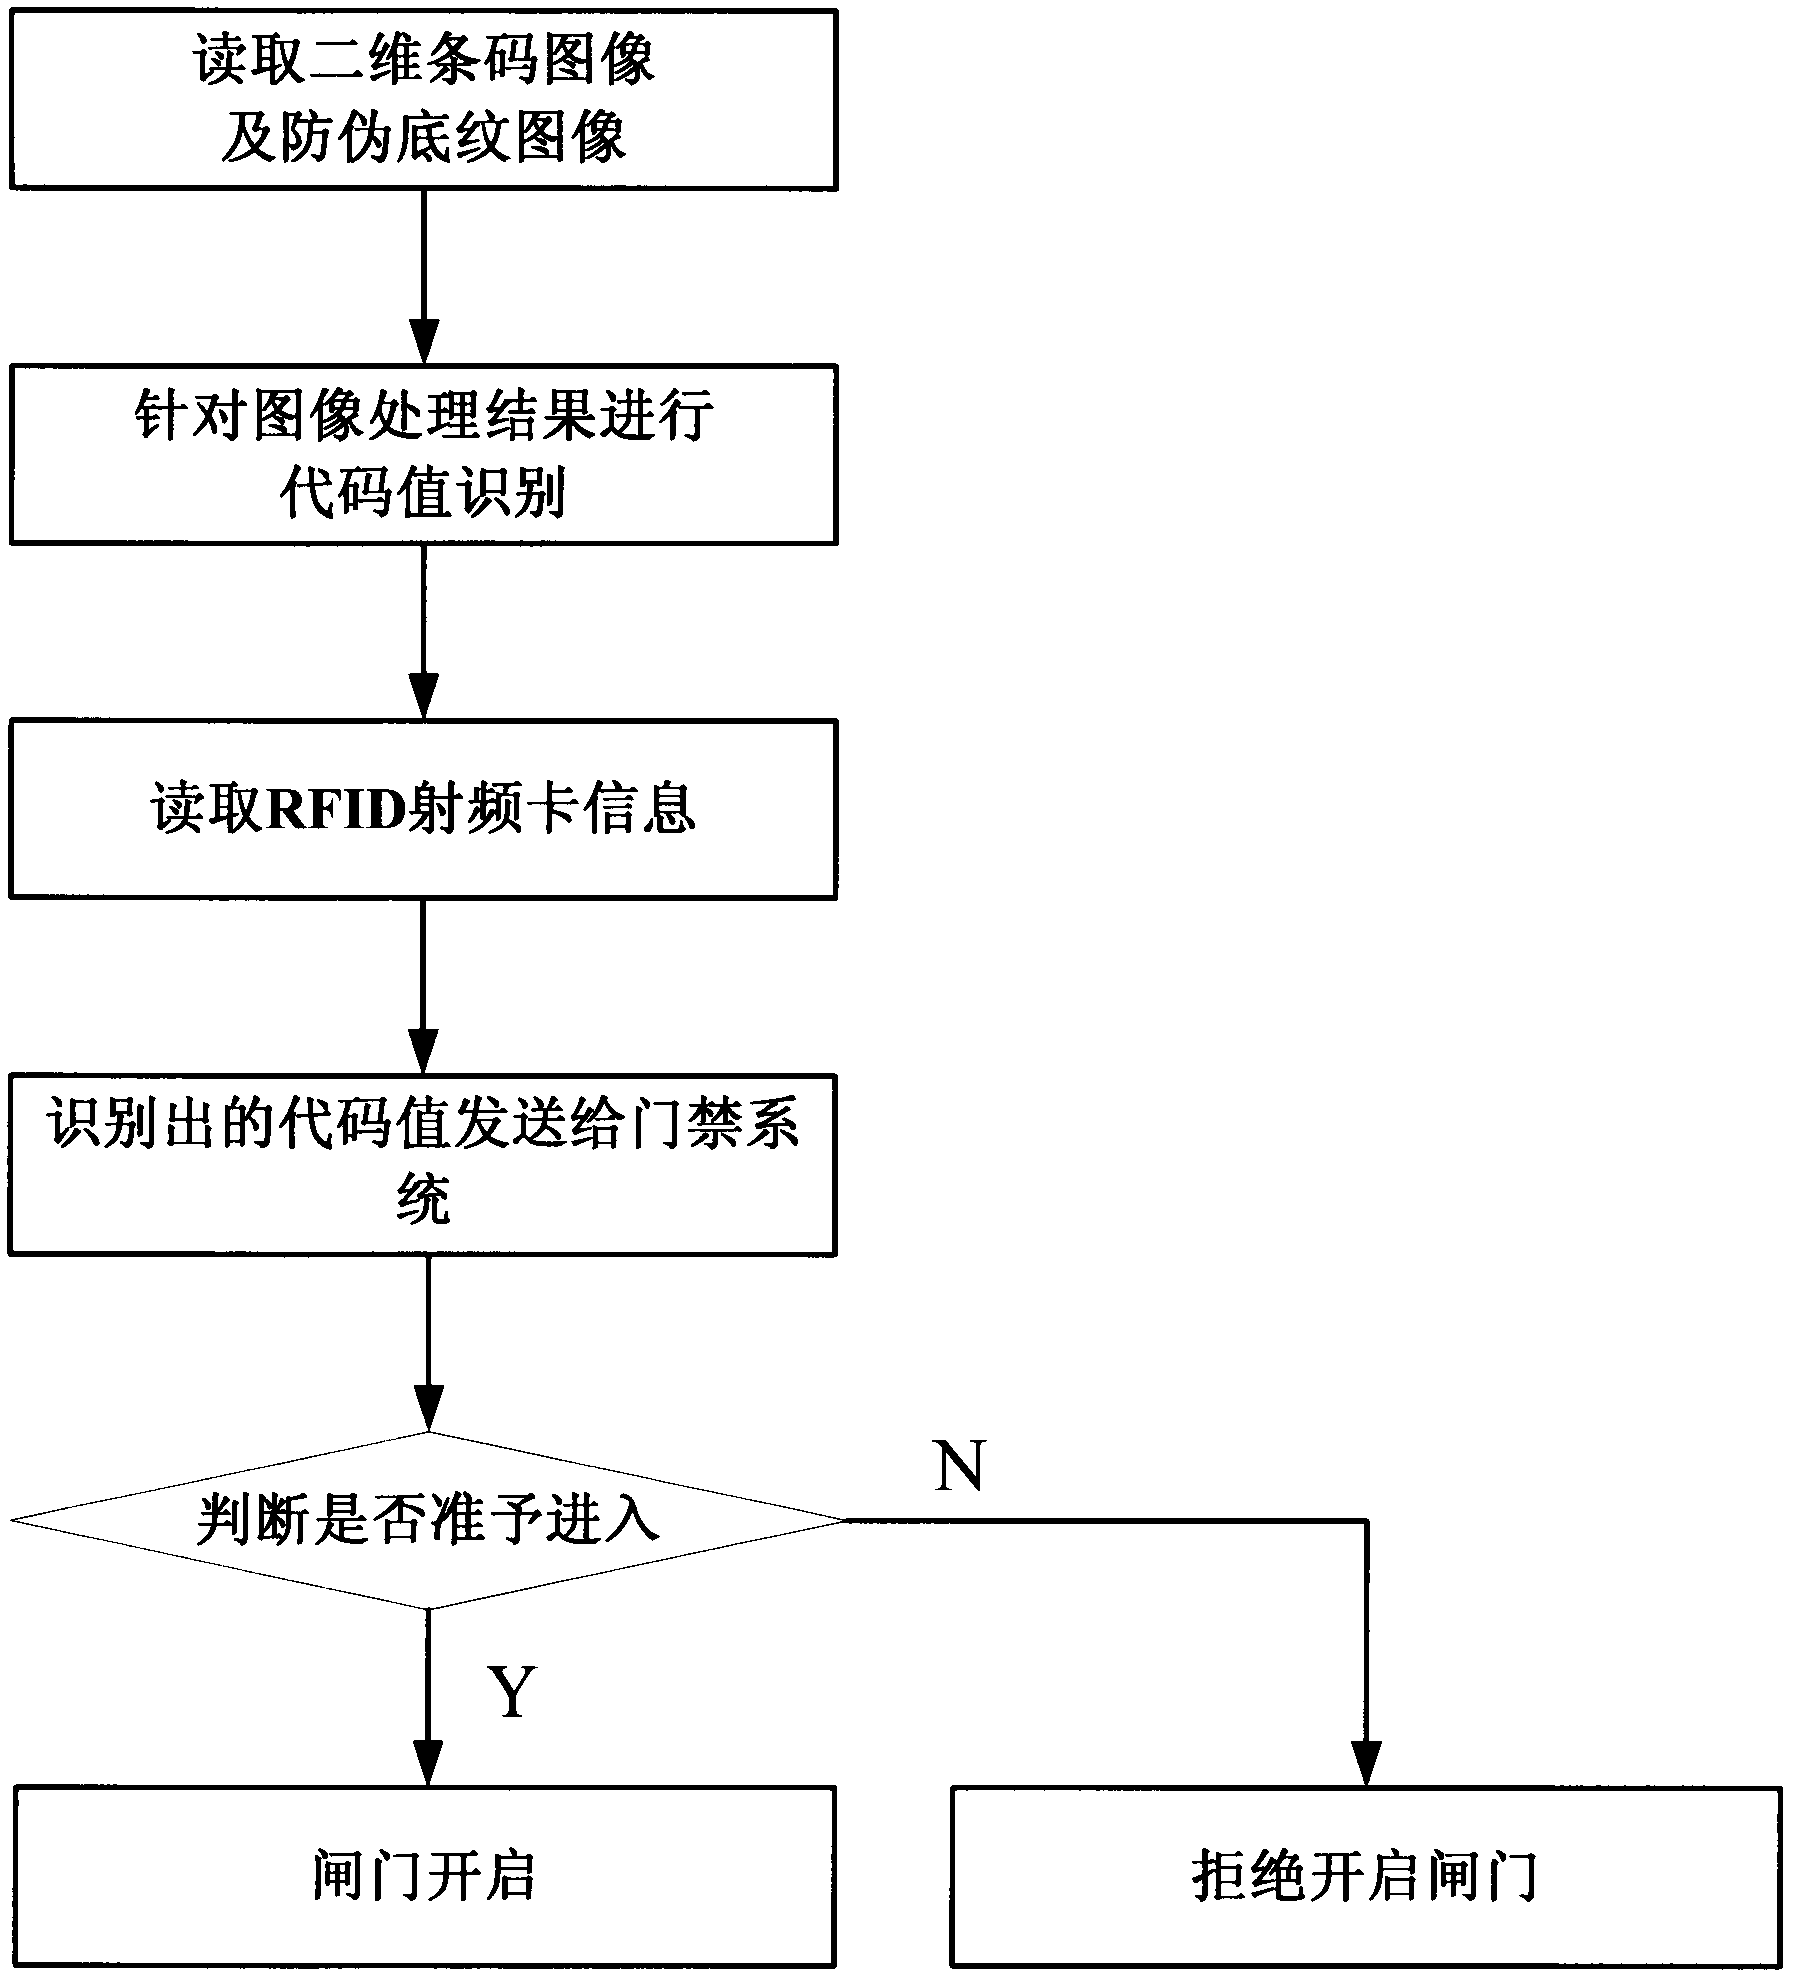 Method for generating admission tickets of public places